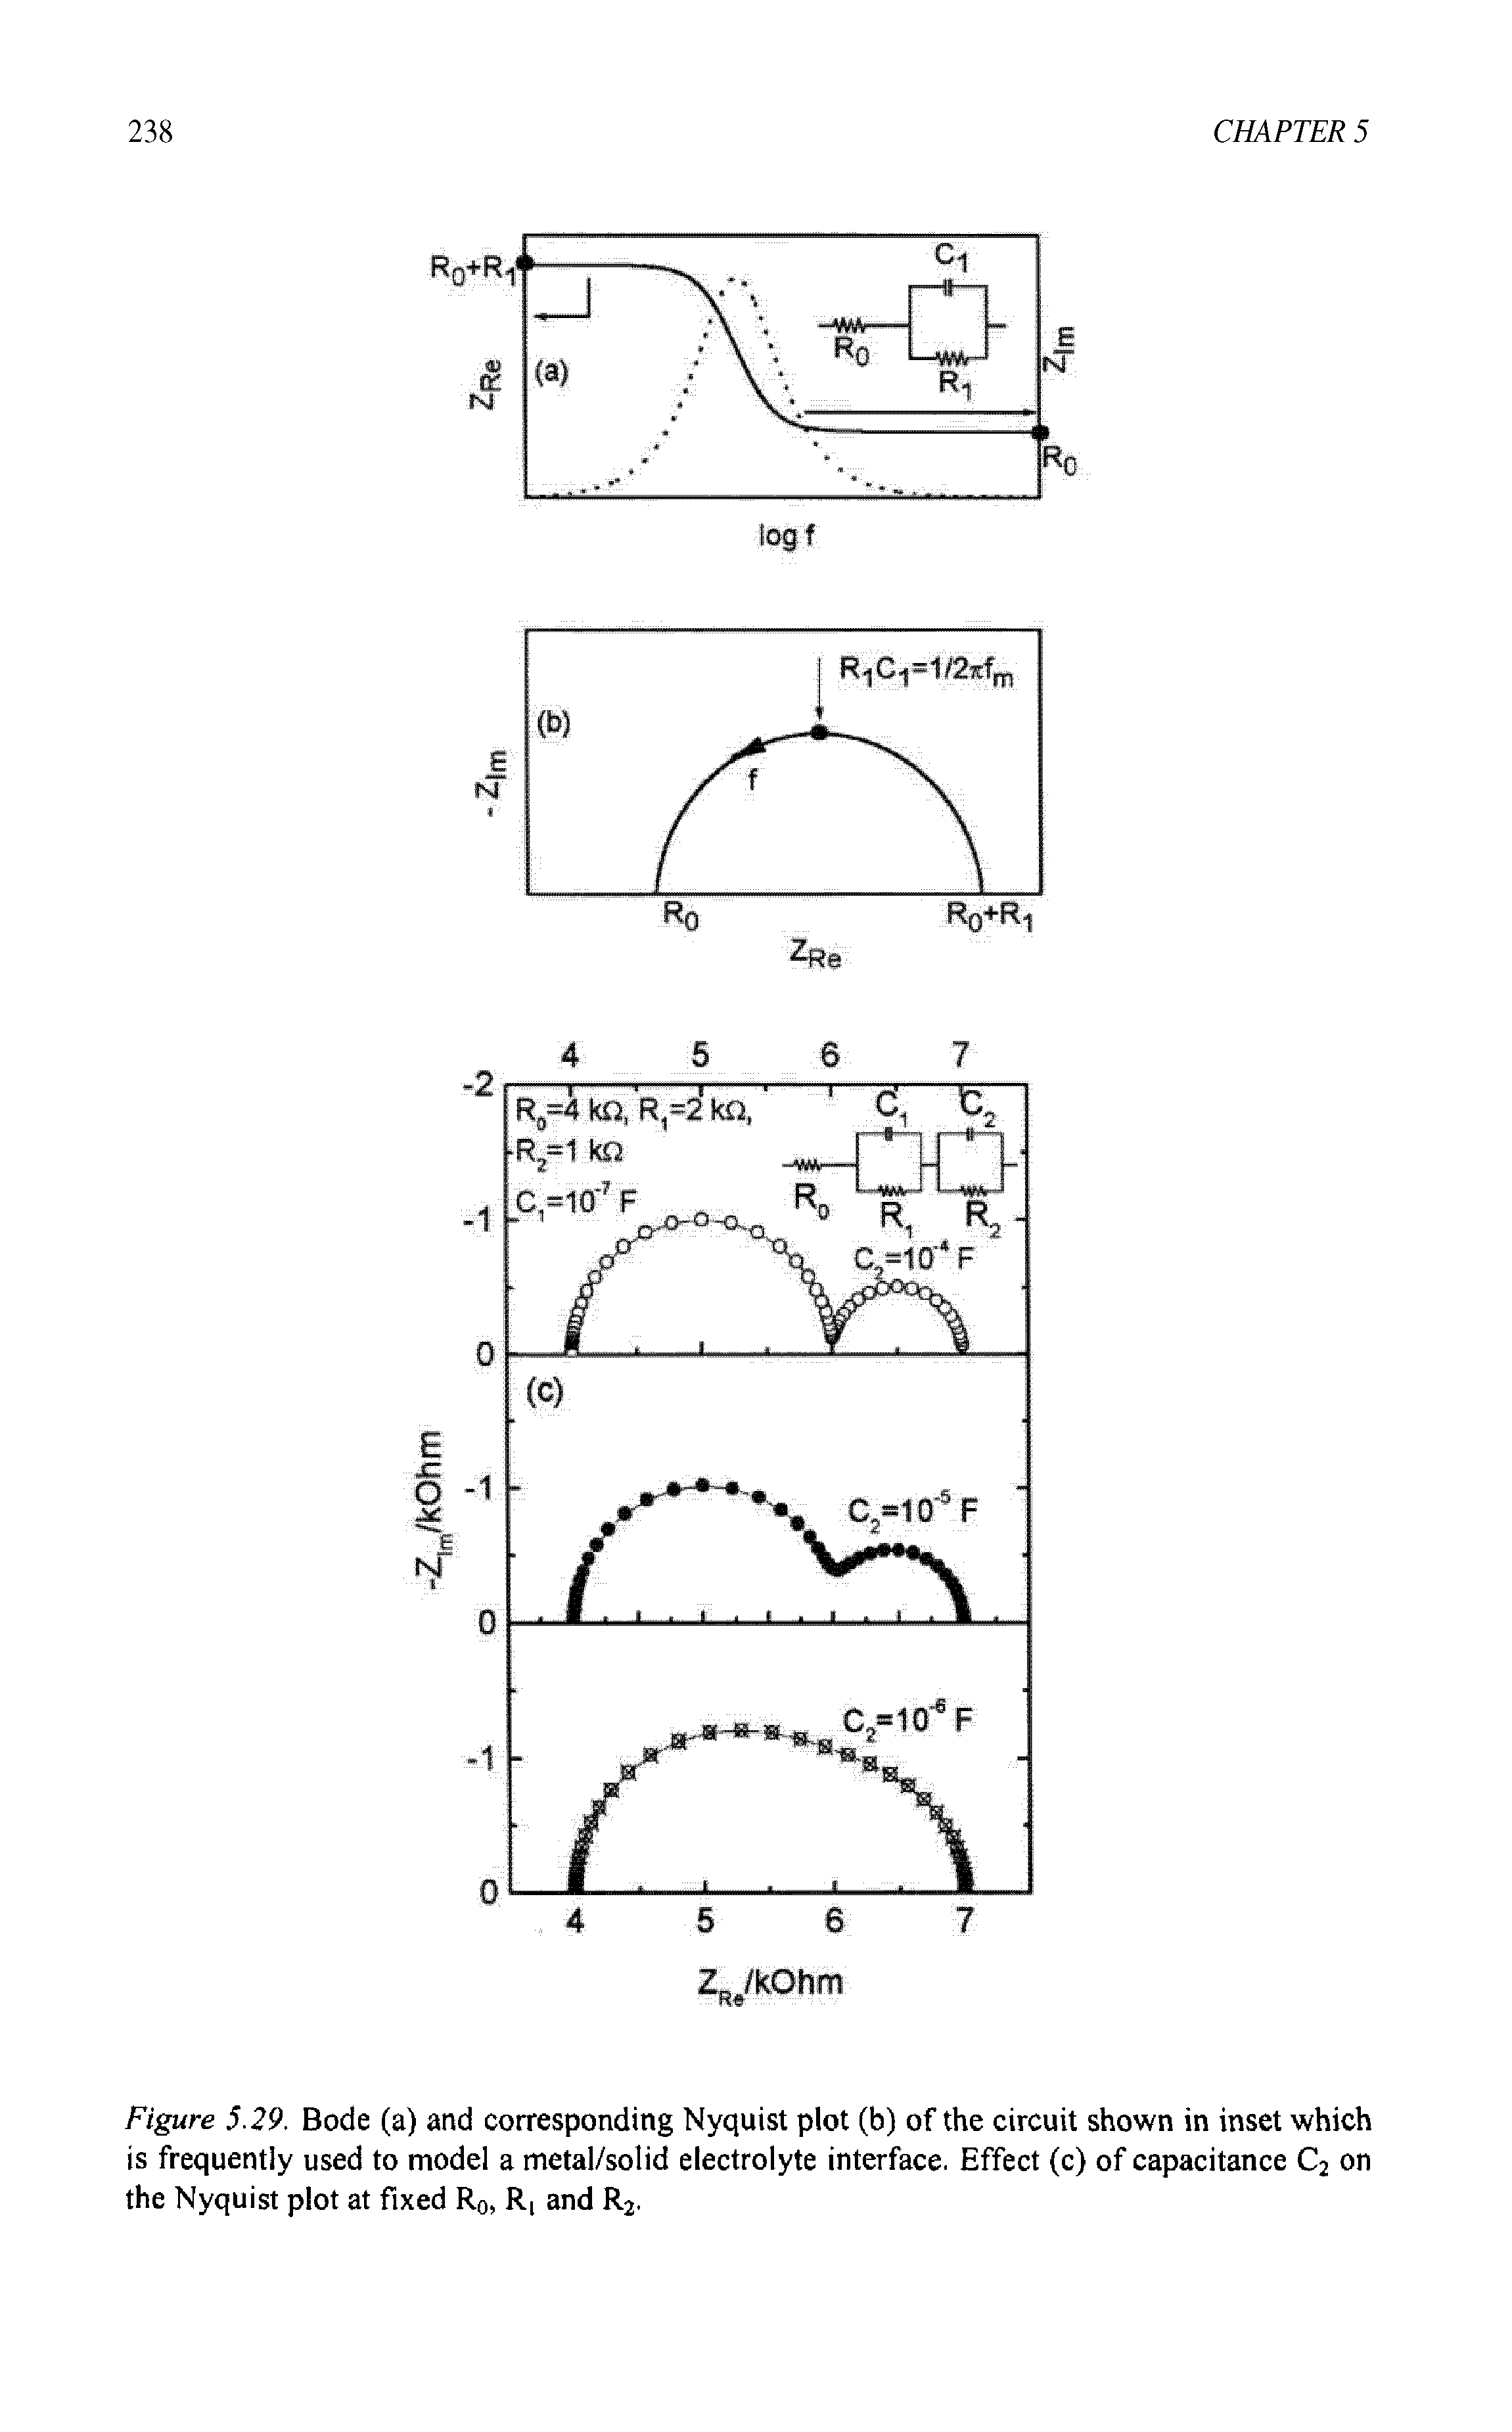 Figure 5.29. Bode (a) and corresponding Nyquist plot (b) of the circuit shown in inset which is frequently used to model a metal/solid electrolyte interface. Effect (c) of capacitance C2 on the Nyquist plot at fixed R0, R( and R2.